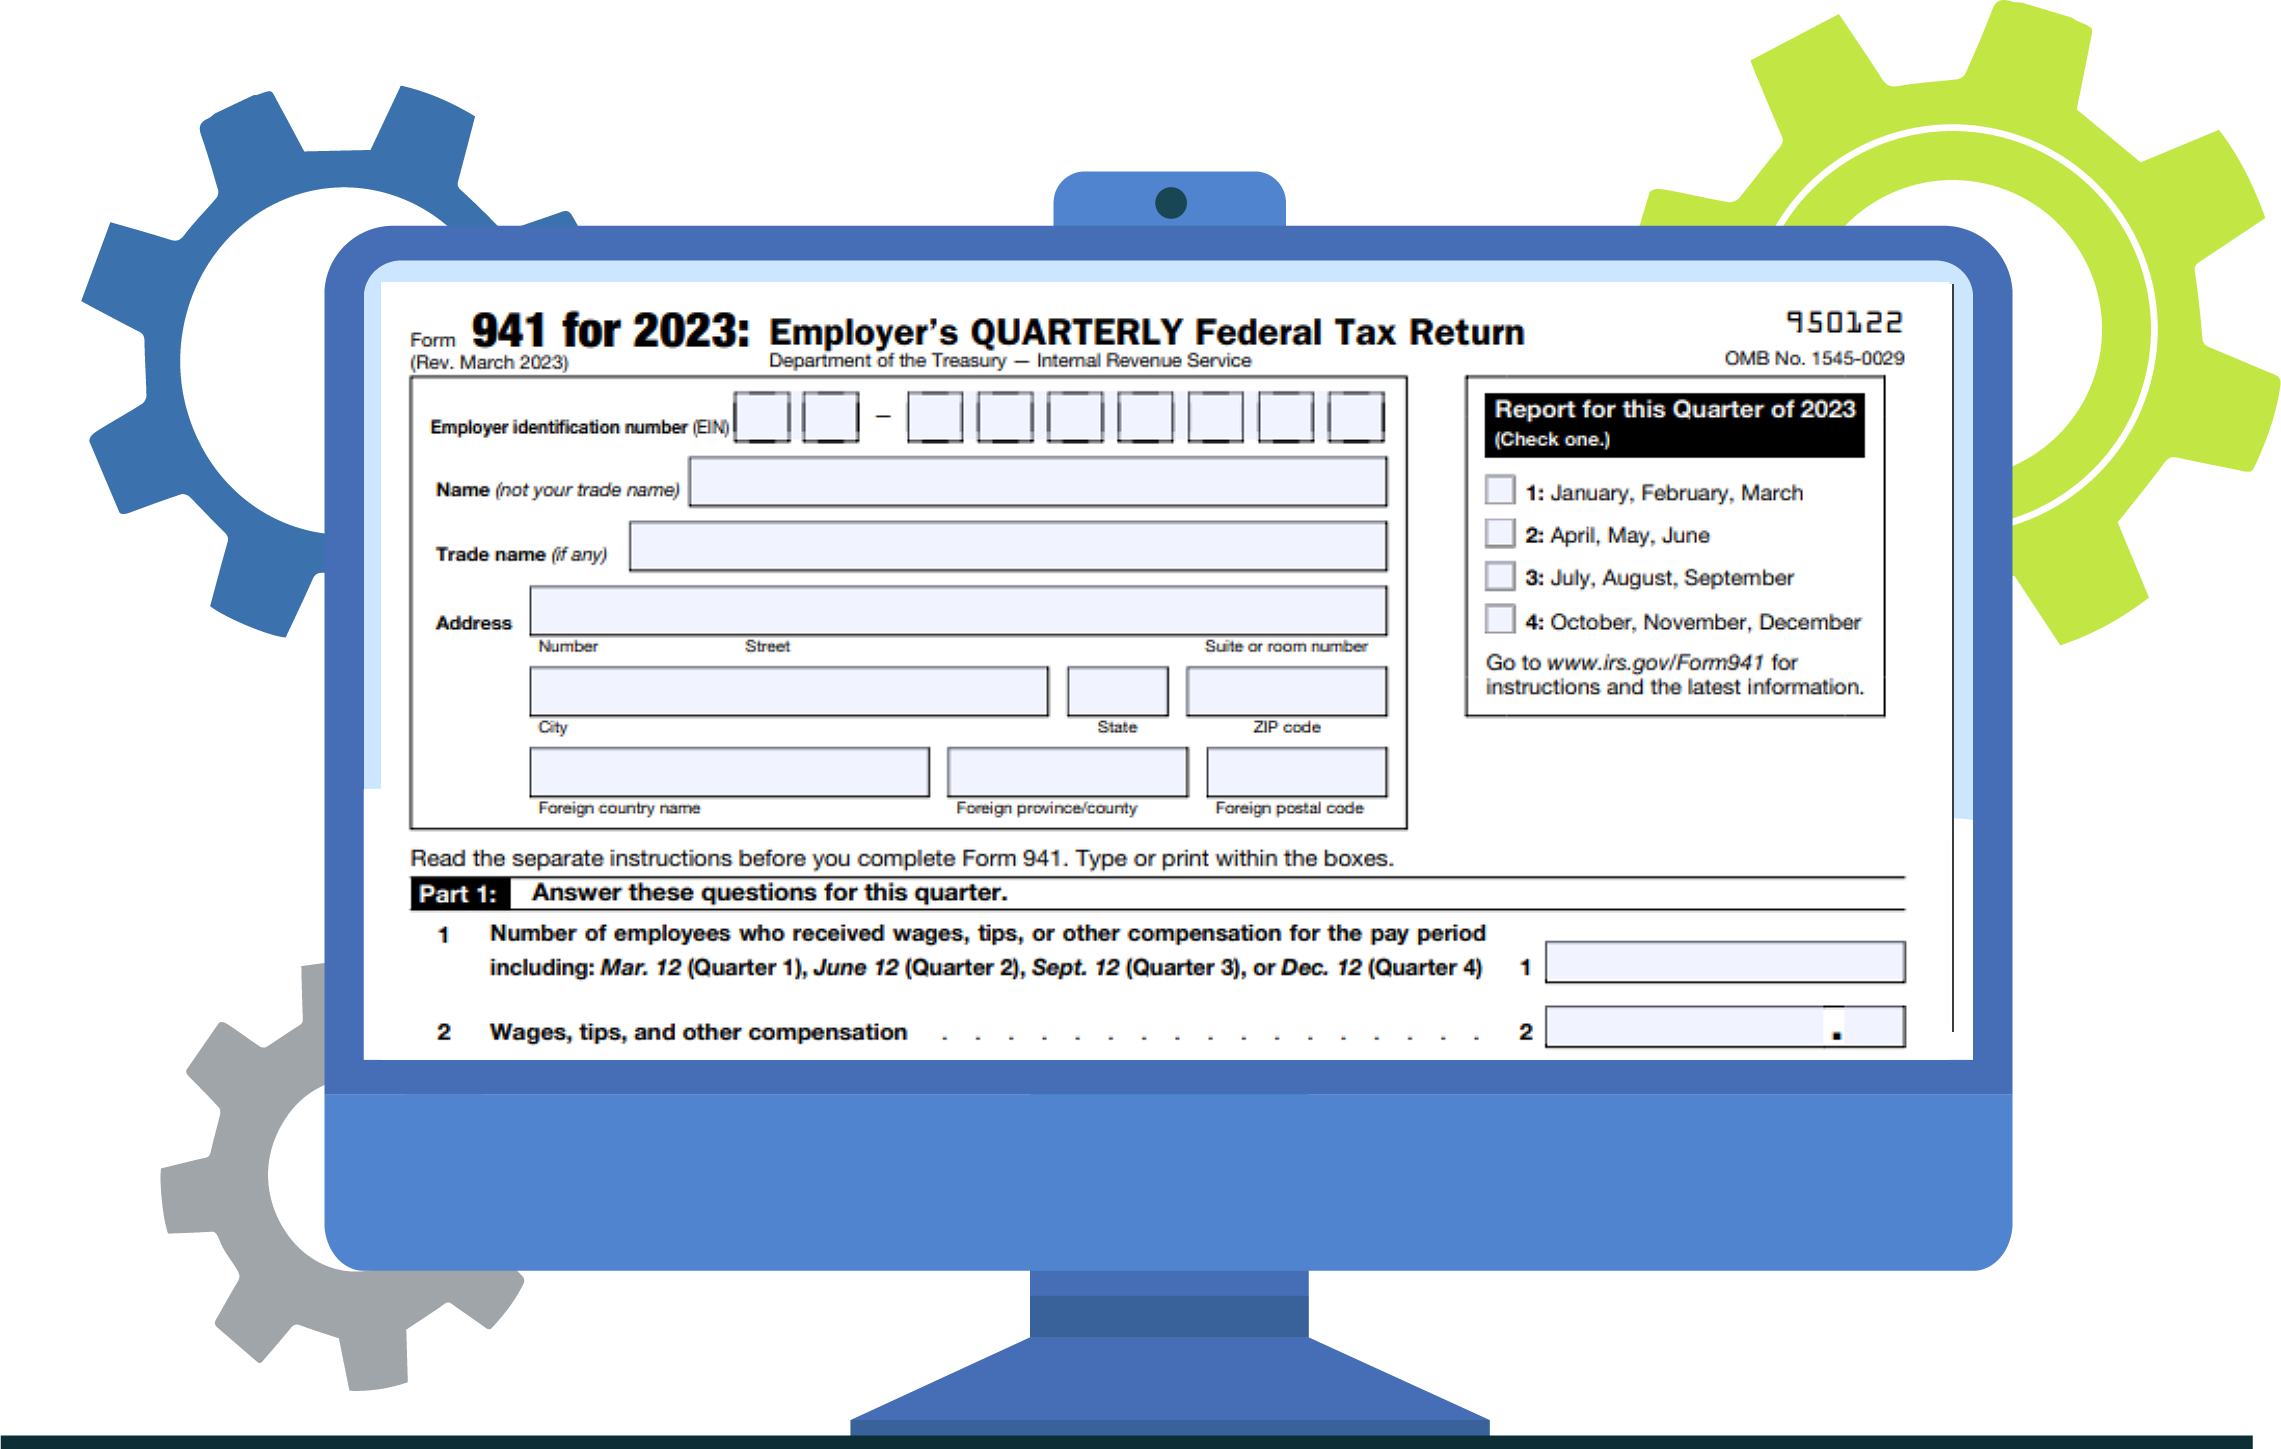 IRS Form 941 for 2023